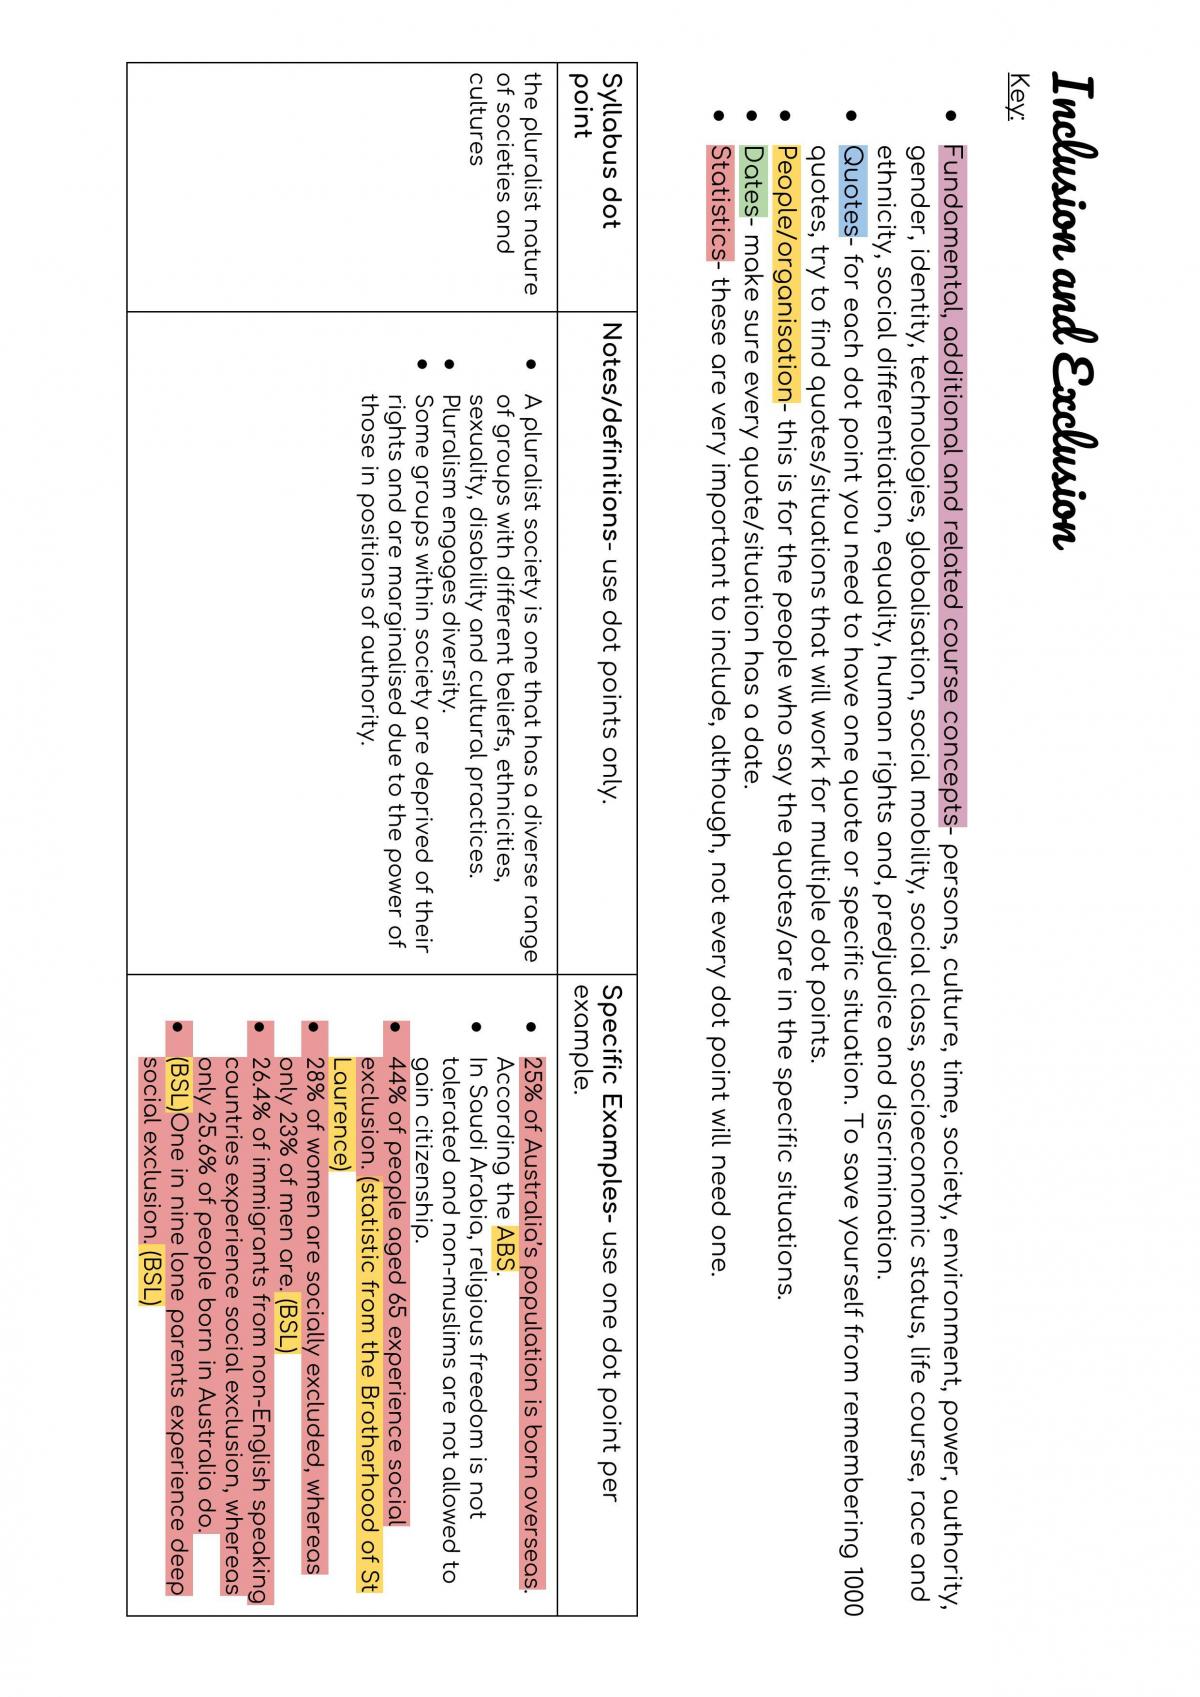 Society and Culture - Inclusion and Exclusion - Page 1